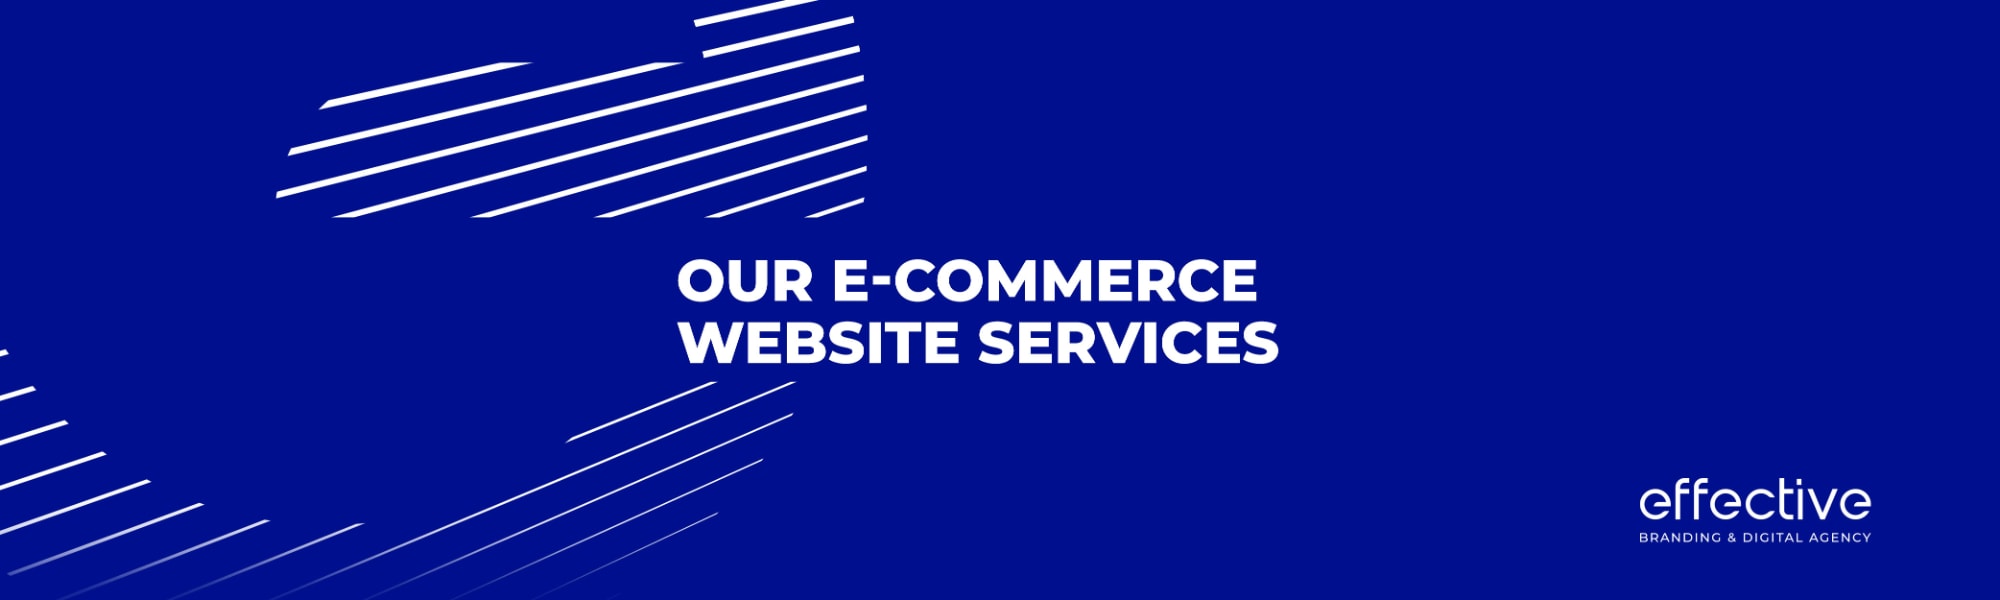 Our e-commerce website services include